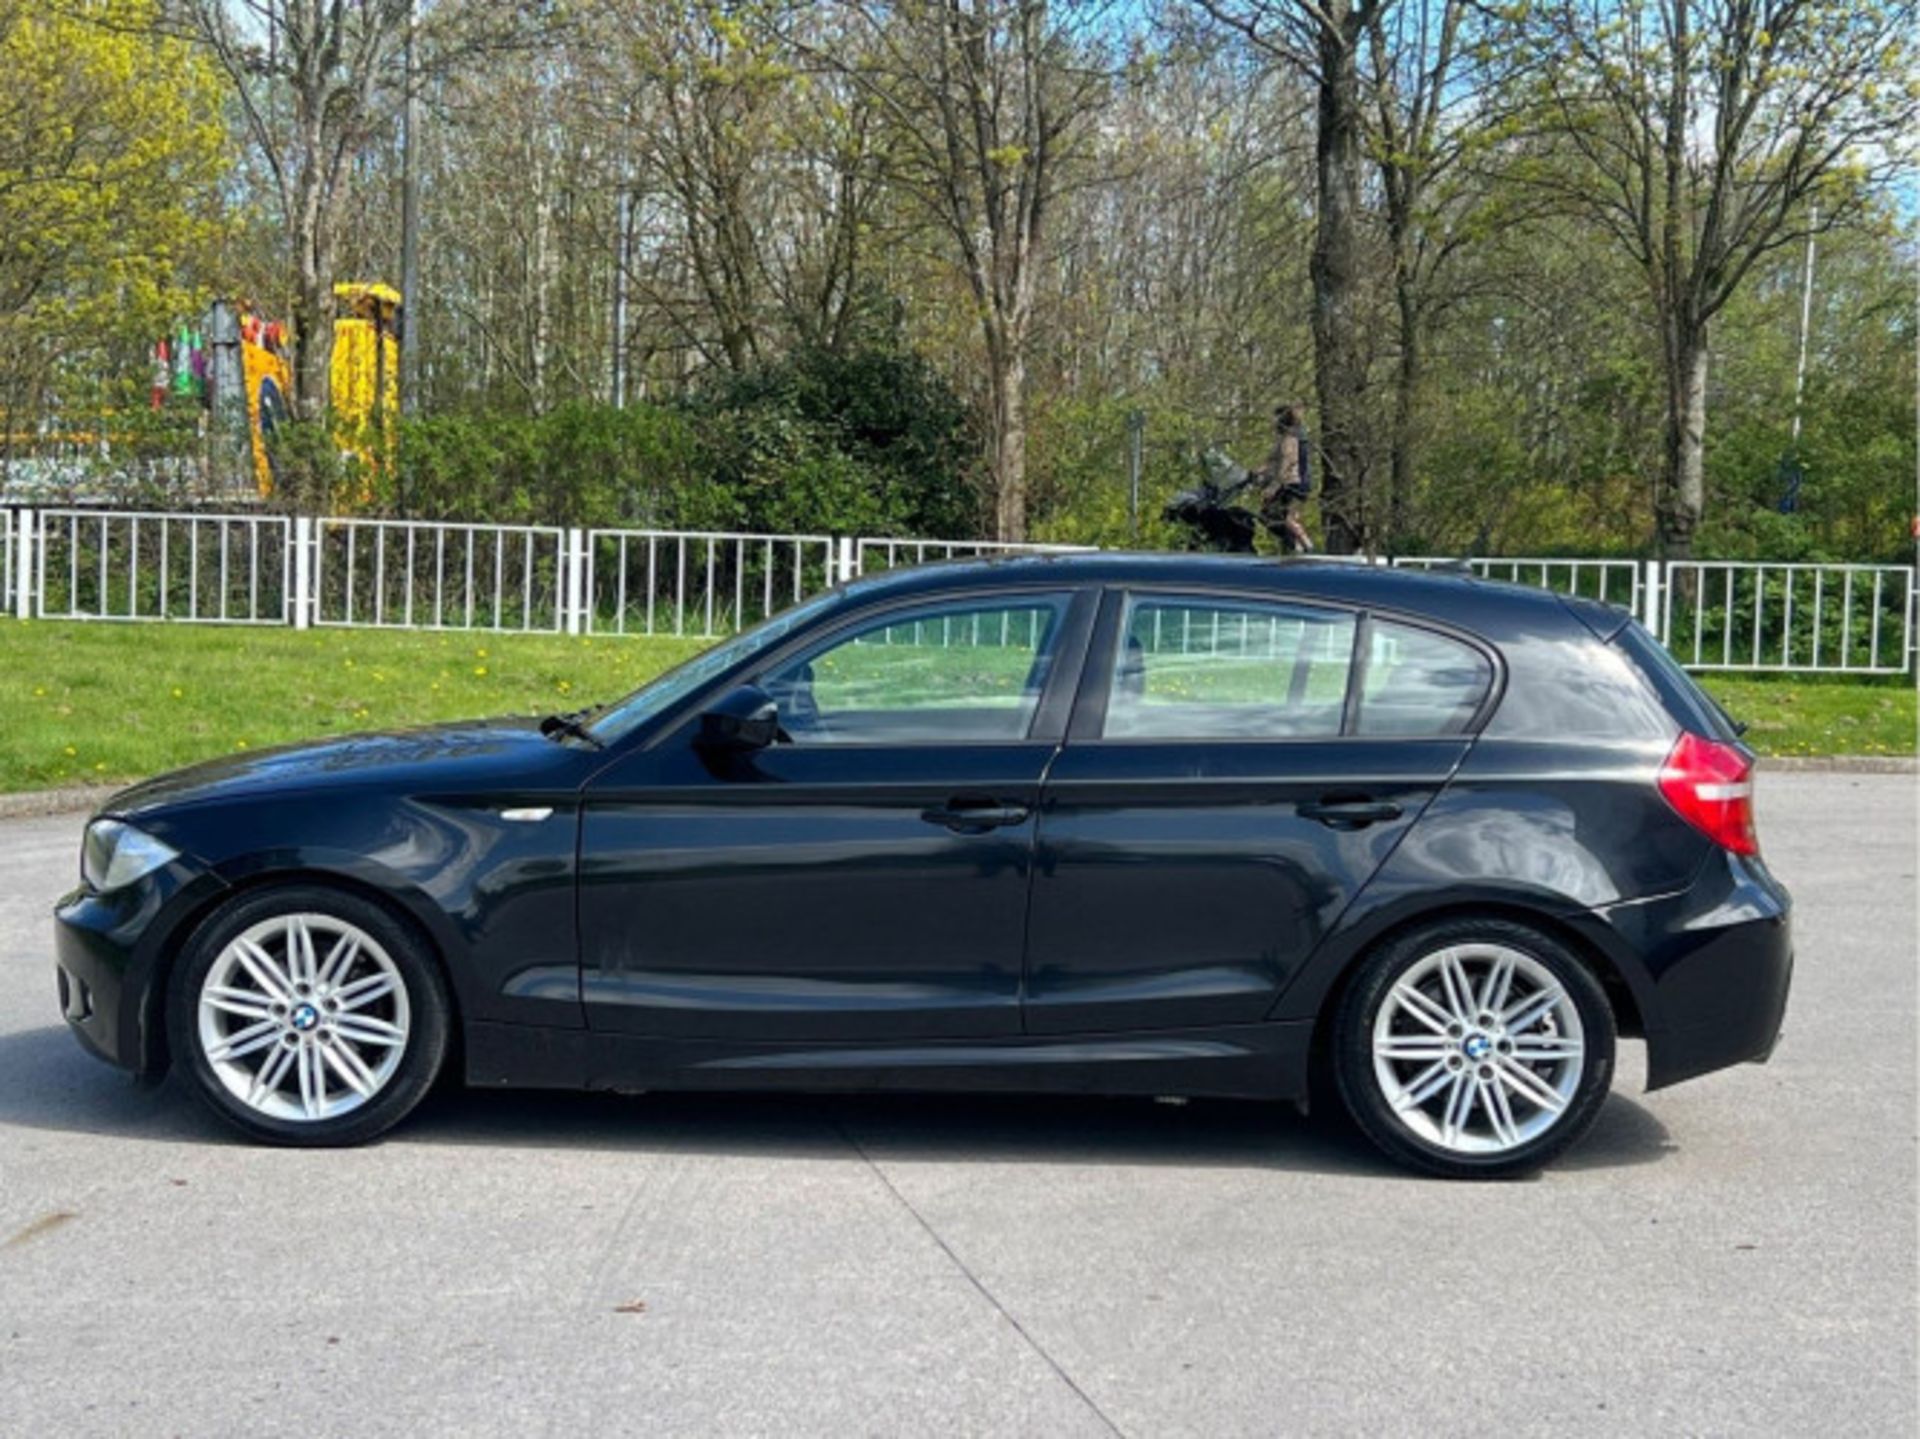 BMW 1 SERIES 2.0 118D M SPORT EURO 5 5DR (2010) - Image 7 of 58